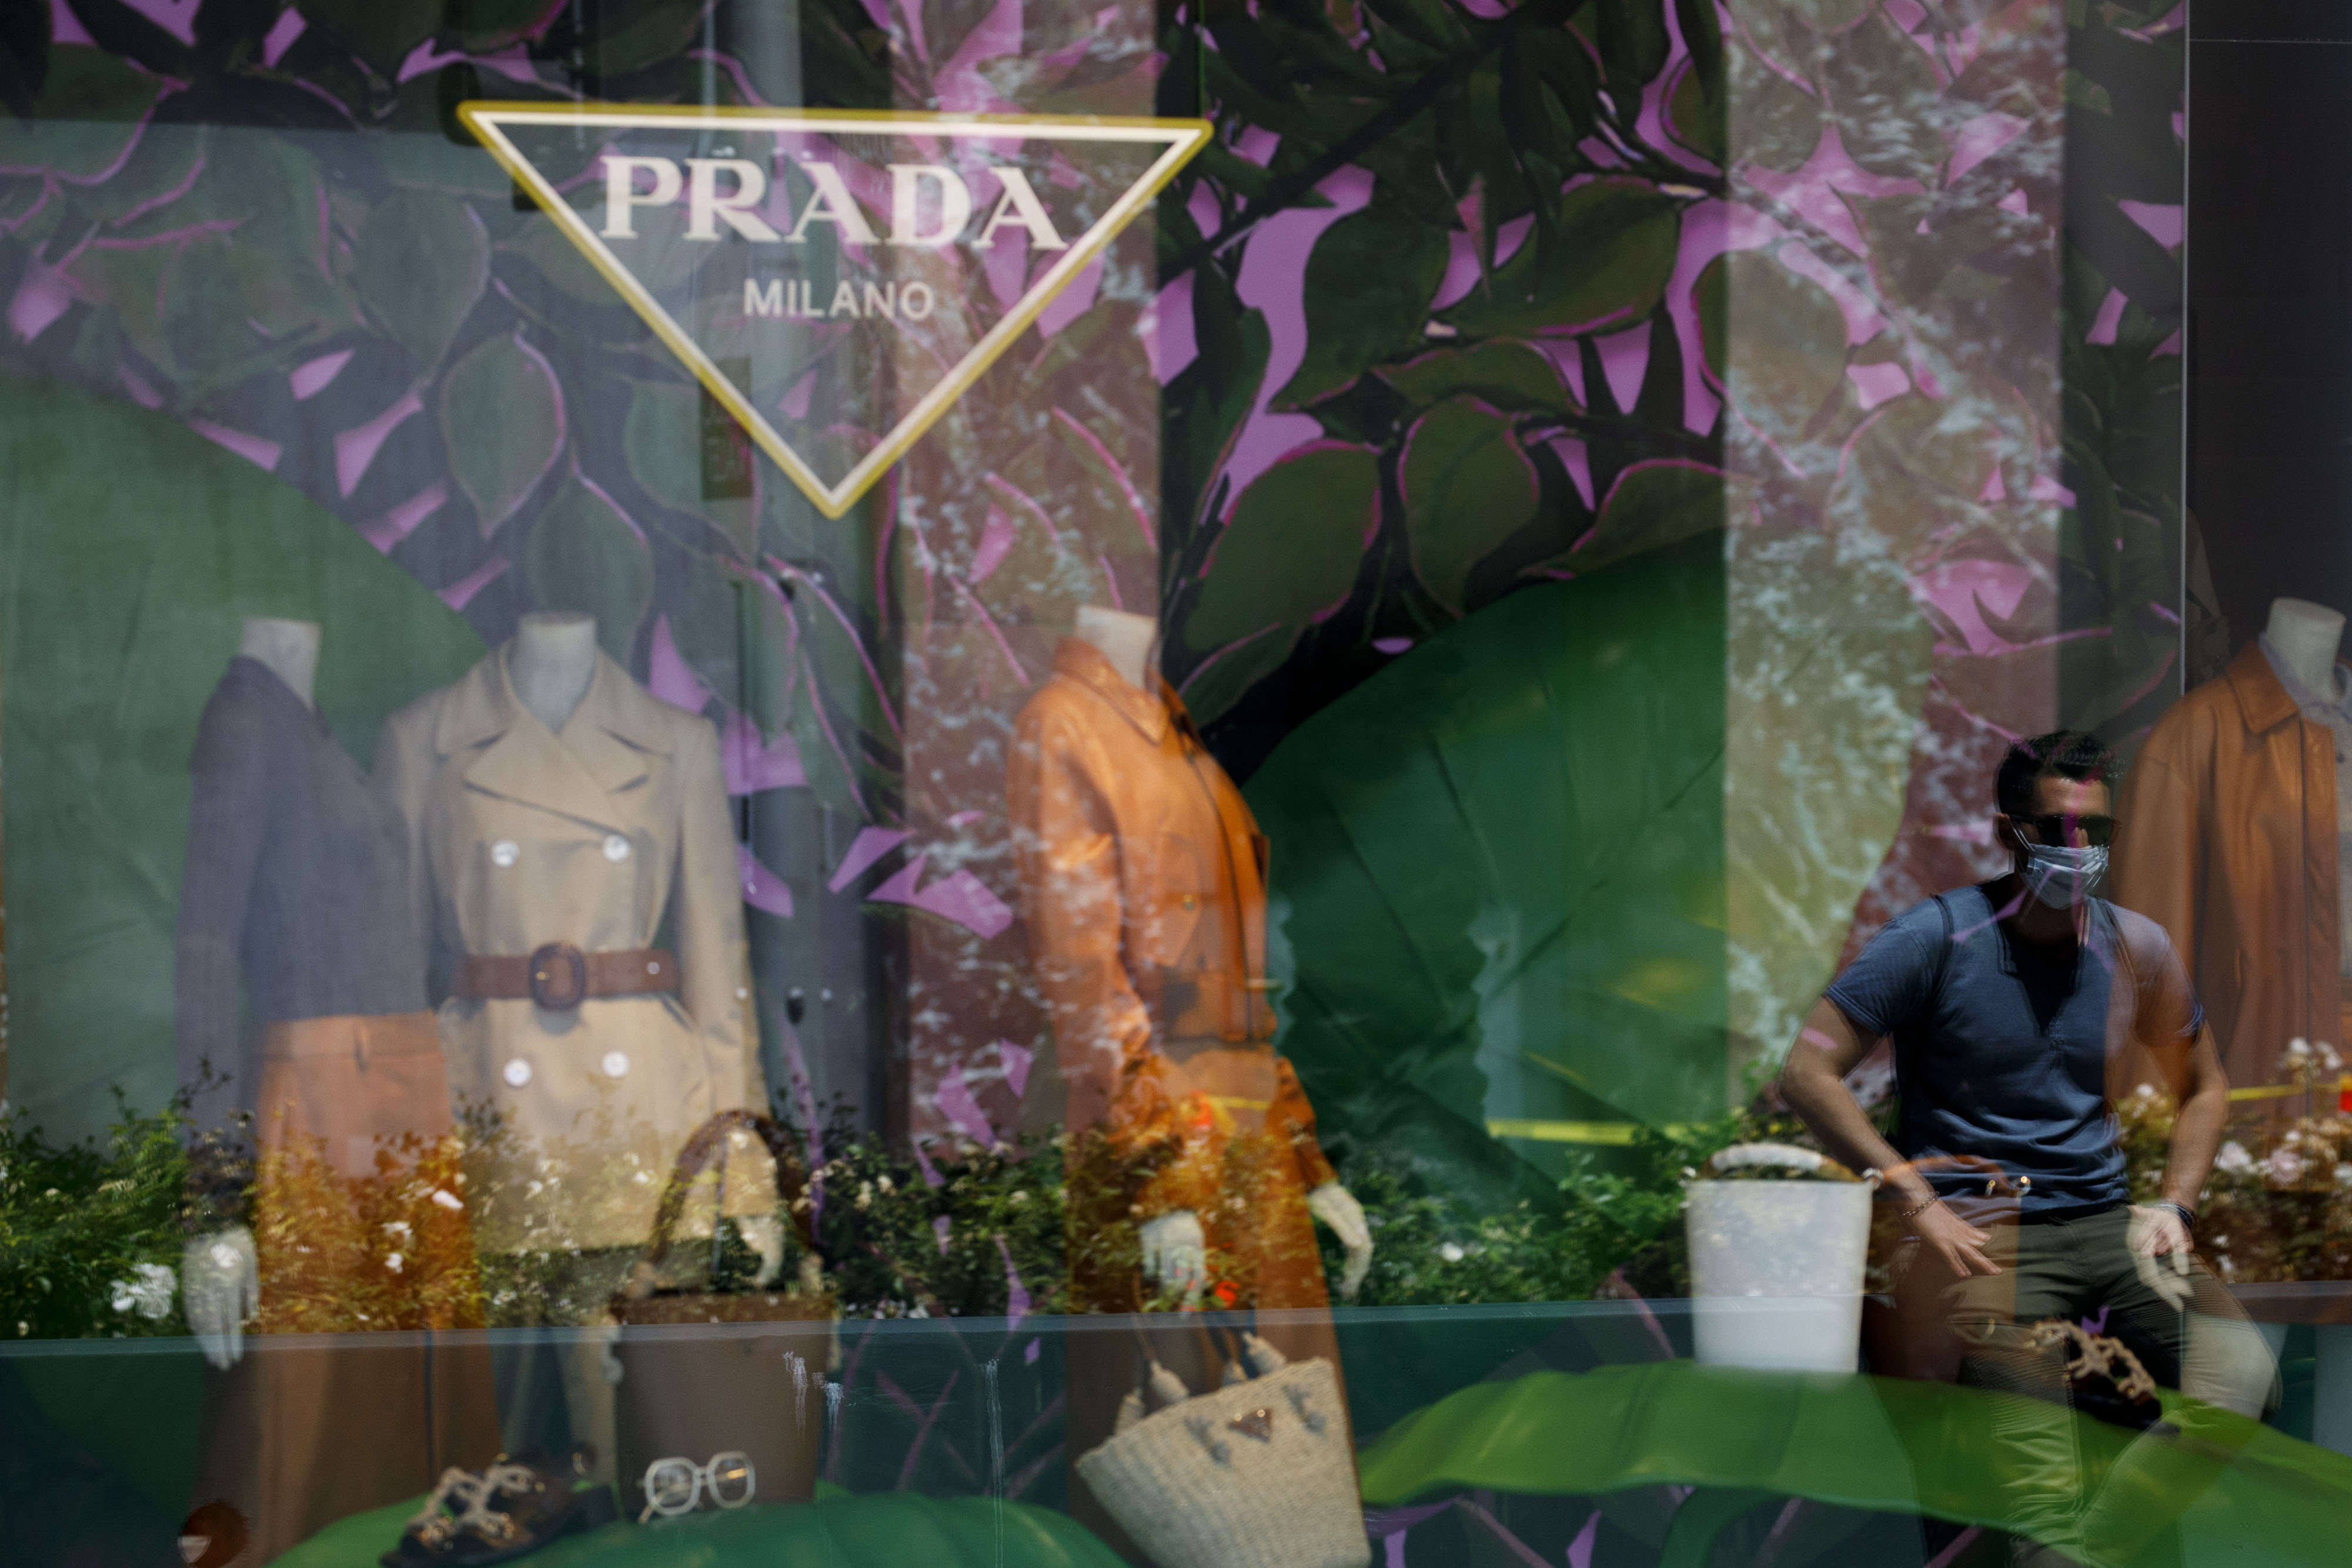 Prada Taps Ex LVMH Executive for CEO as Family Keep Roles - Bloomberg